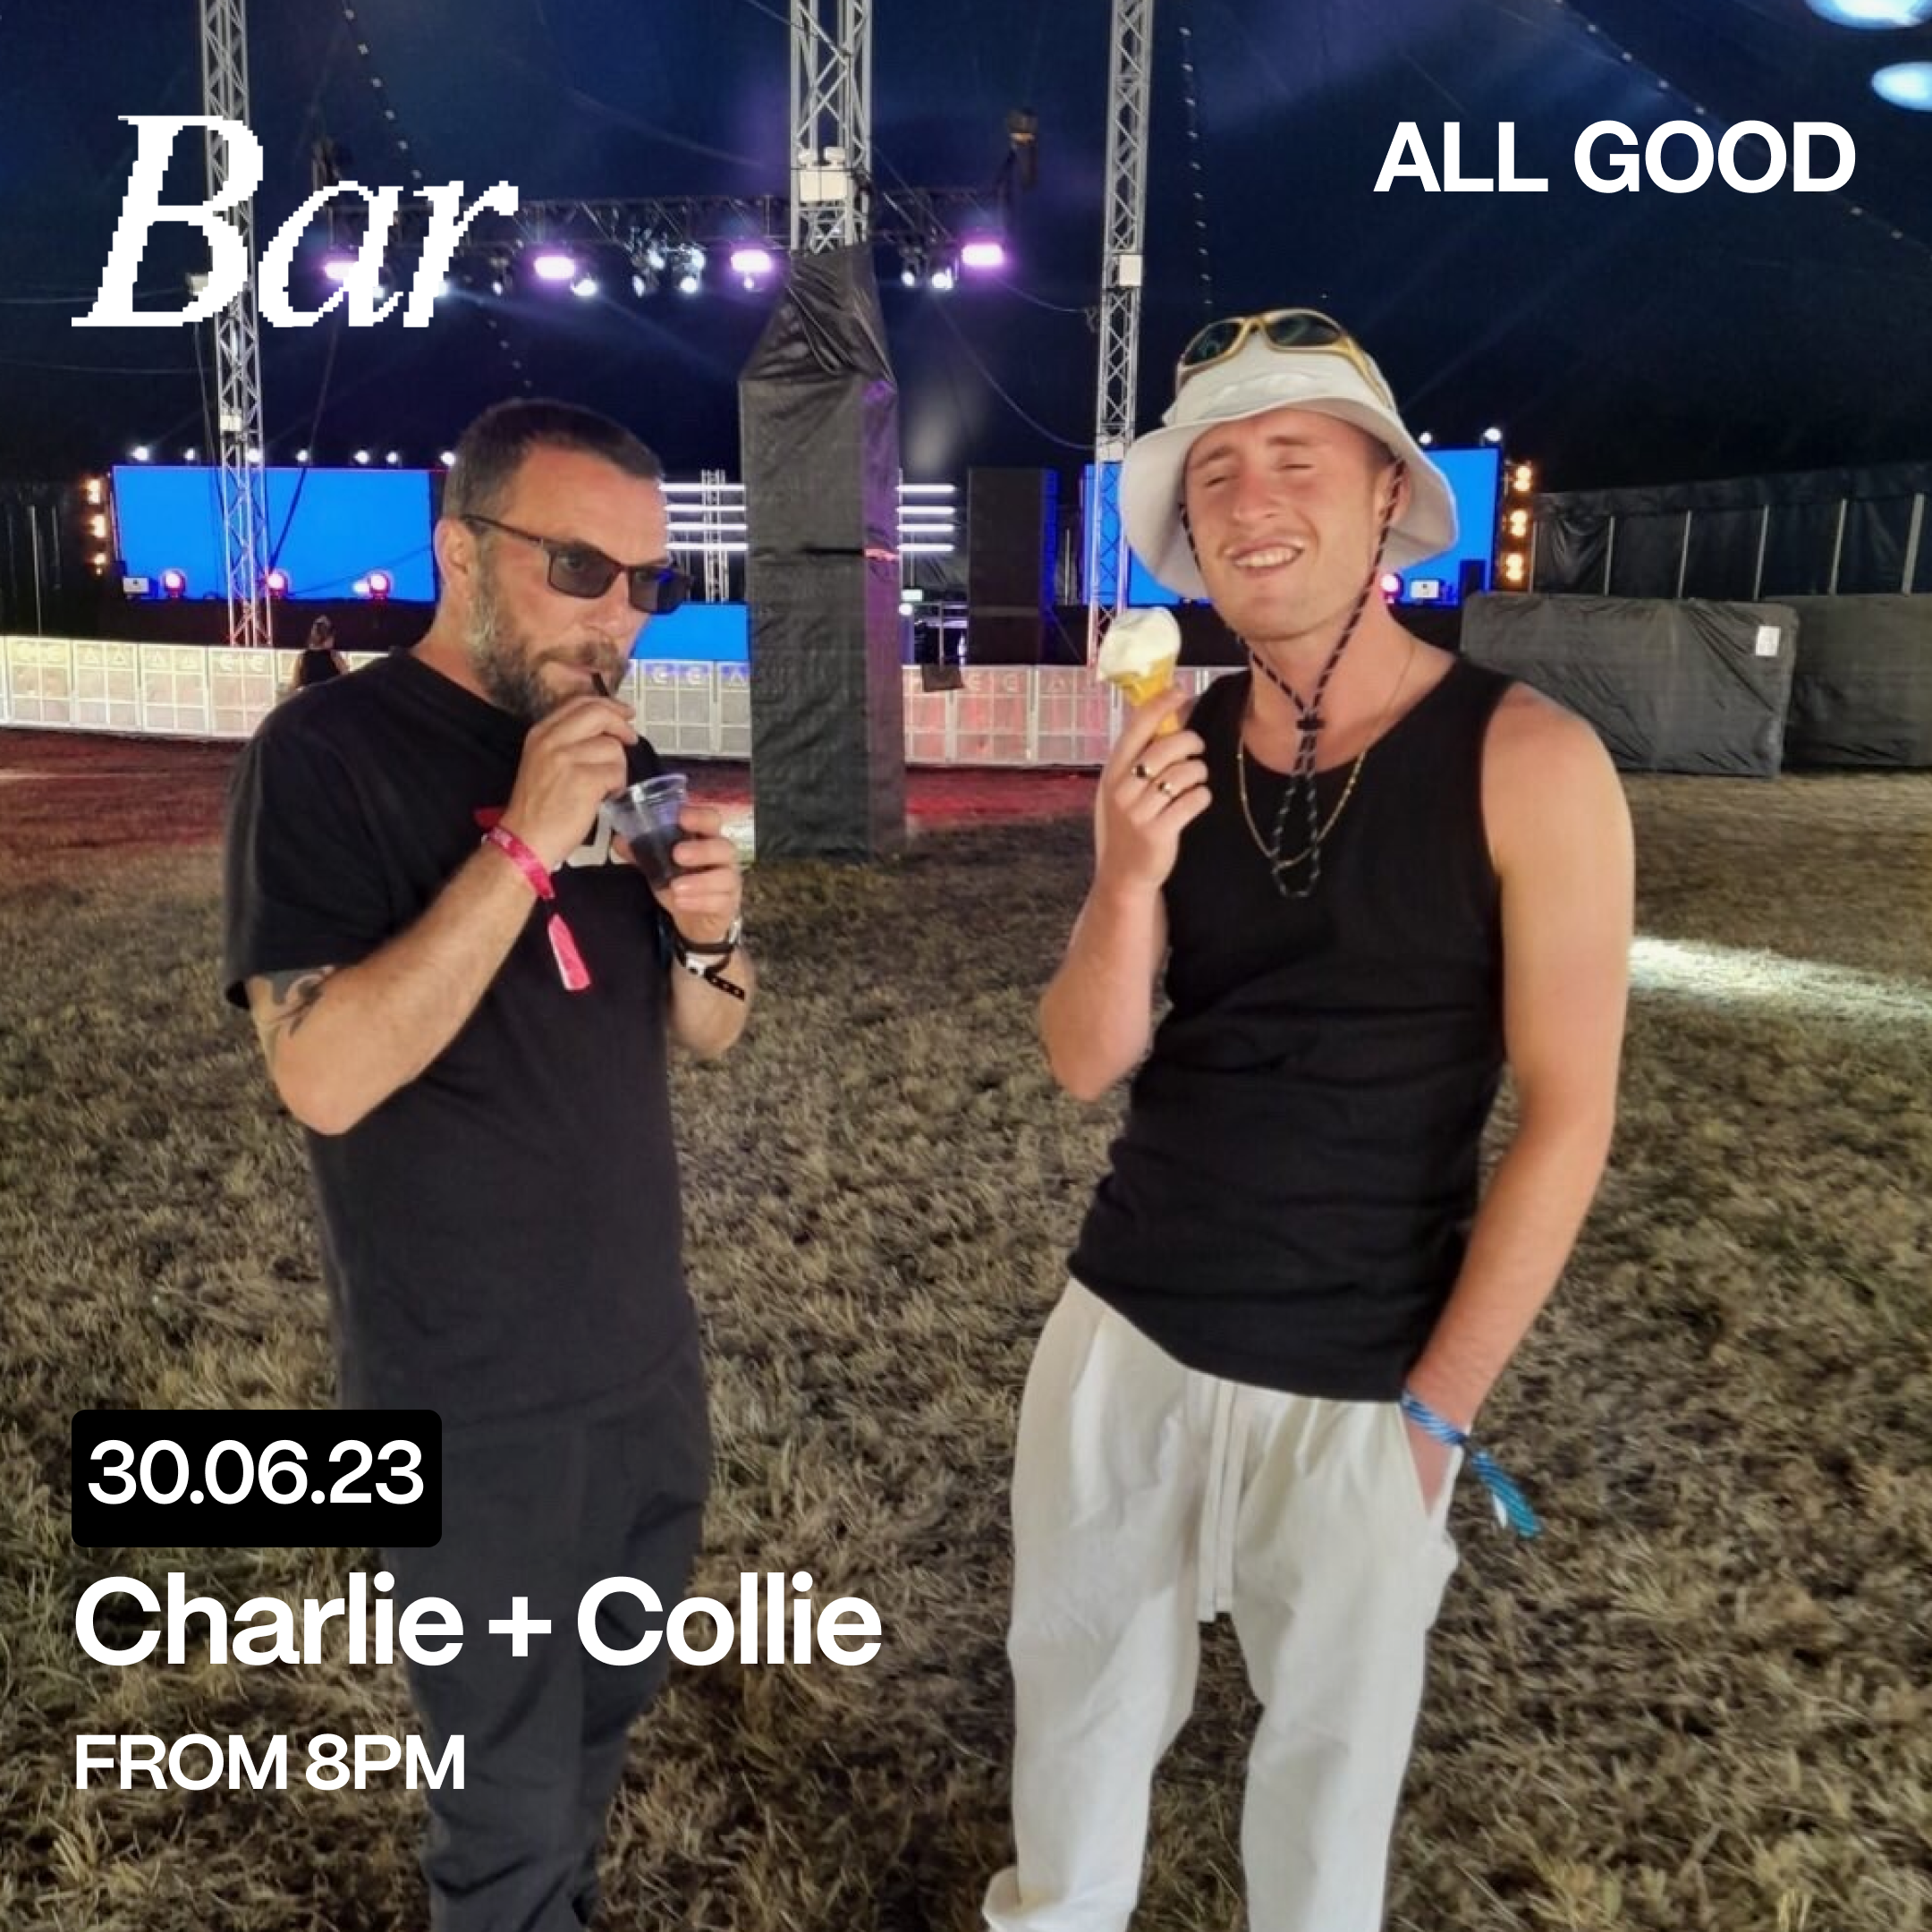 All Good: Charlie + Collie - フライヤー表